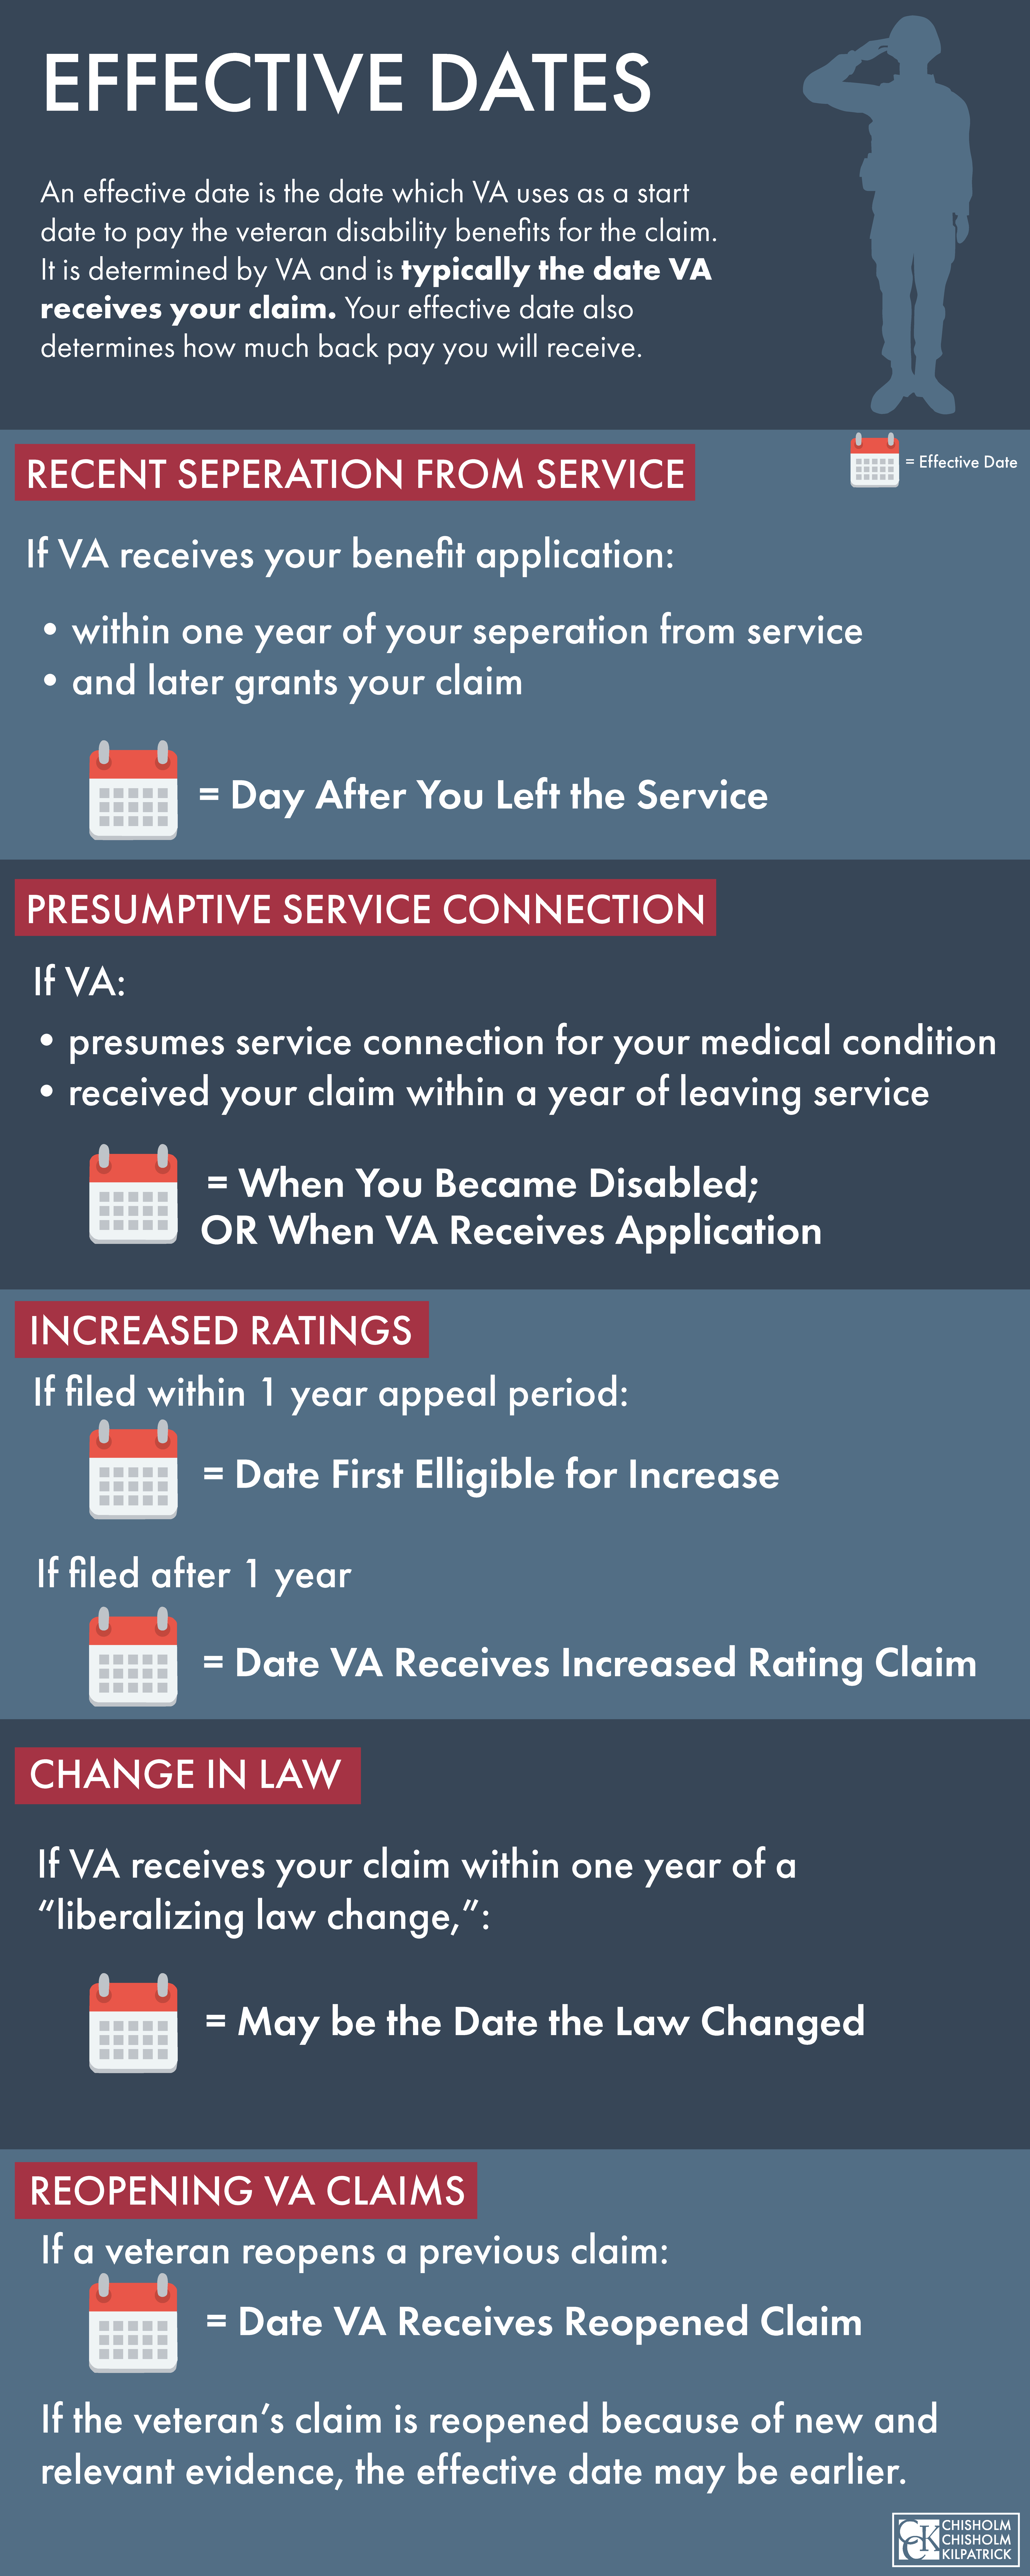 va disability effective dates for VA claims are usually the day VA received the claim. Effective dates for increased rating, reopening VA claim, presumptive service connection, change in law.